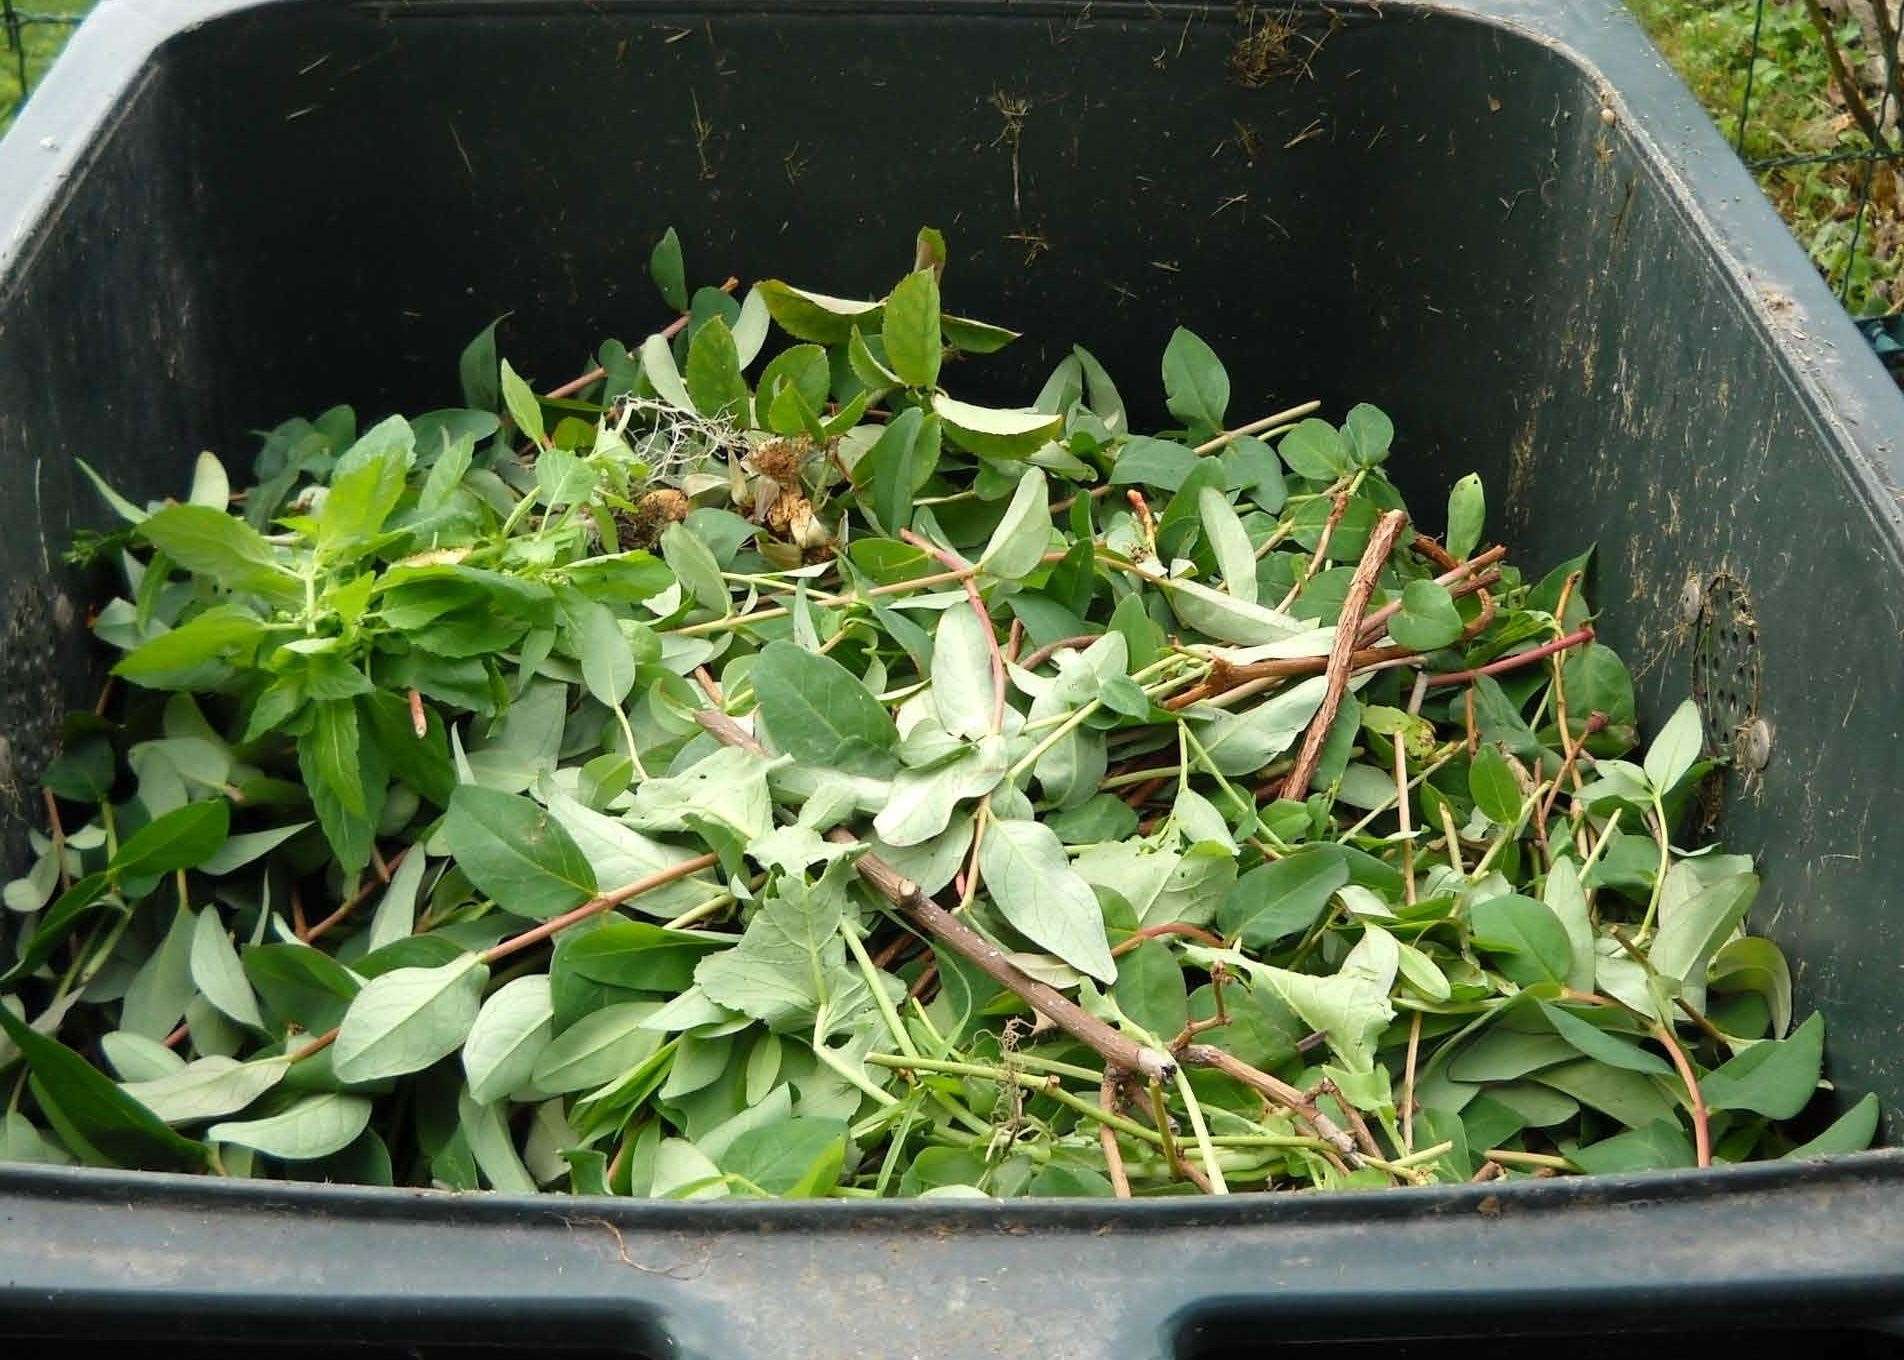 Canterbury City Council wants to introduce a £45 annual fee to collect garden waste